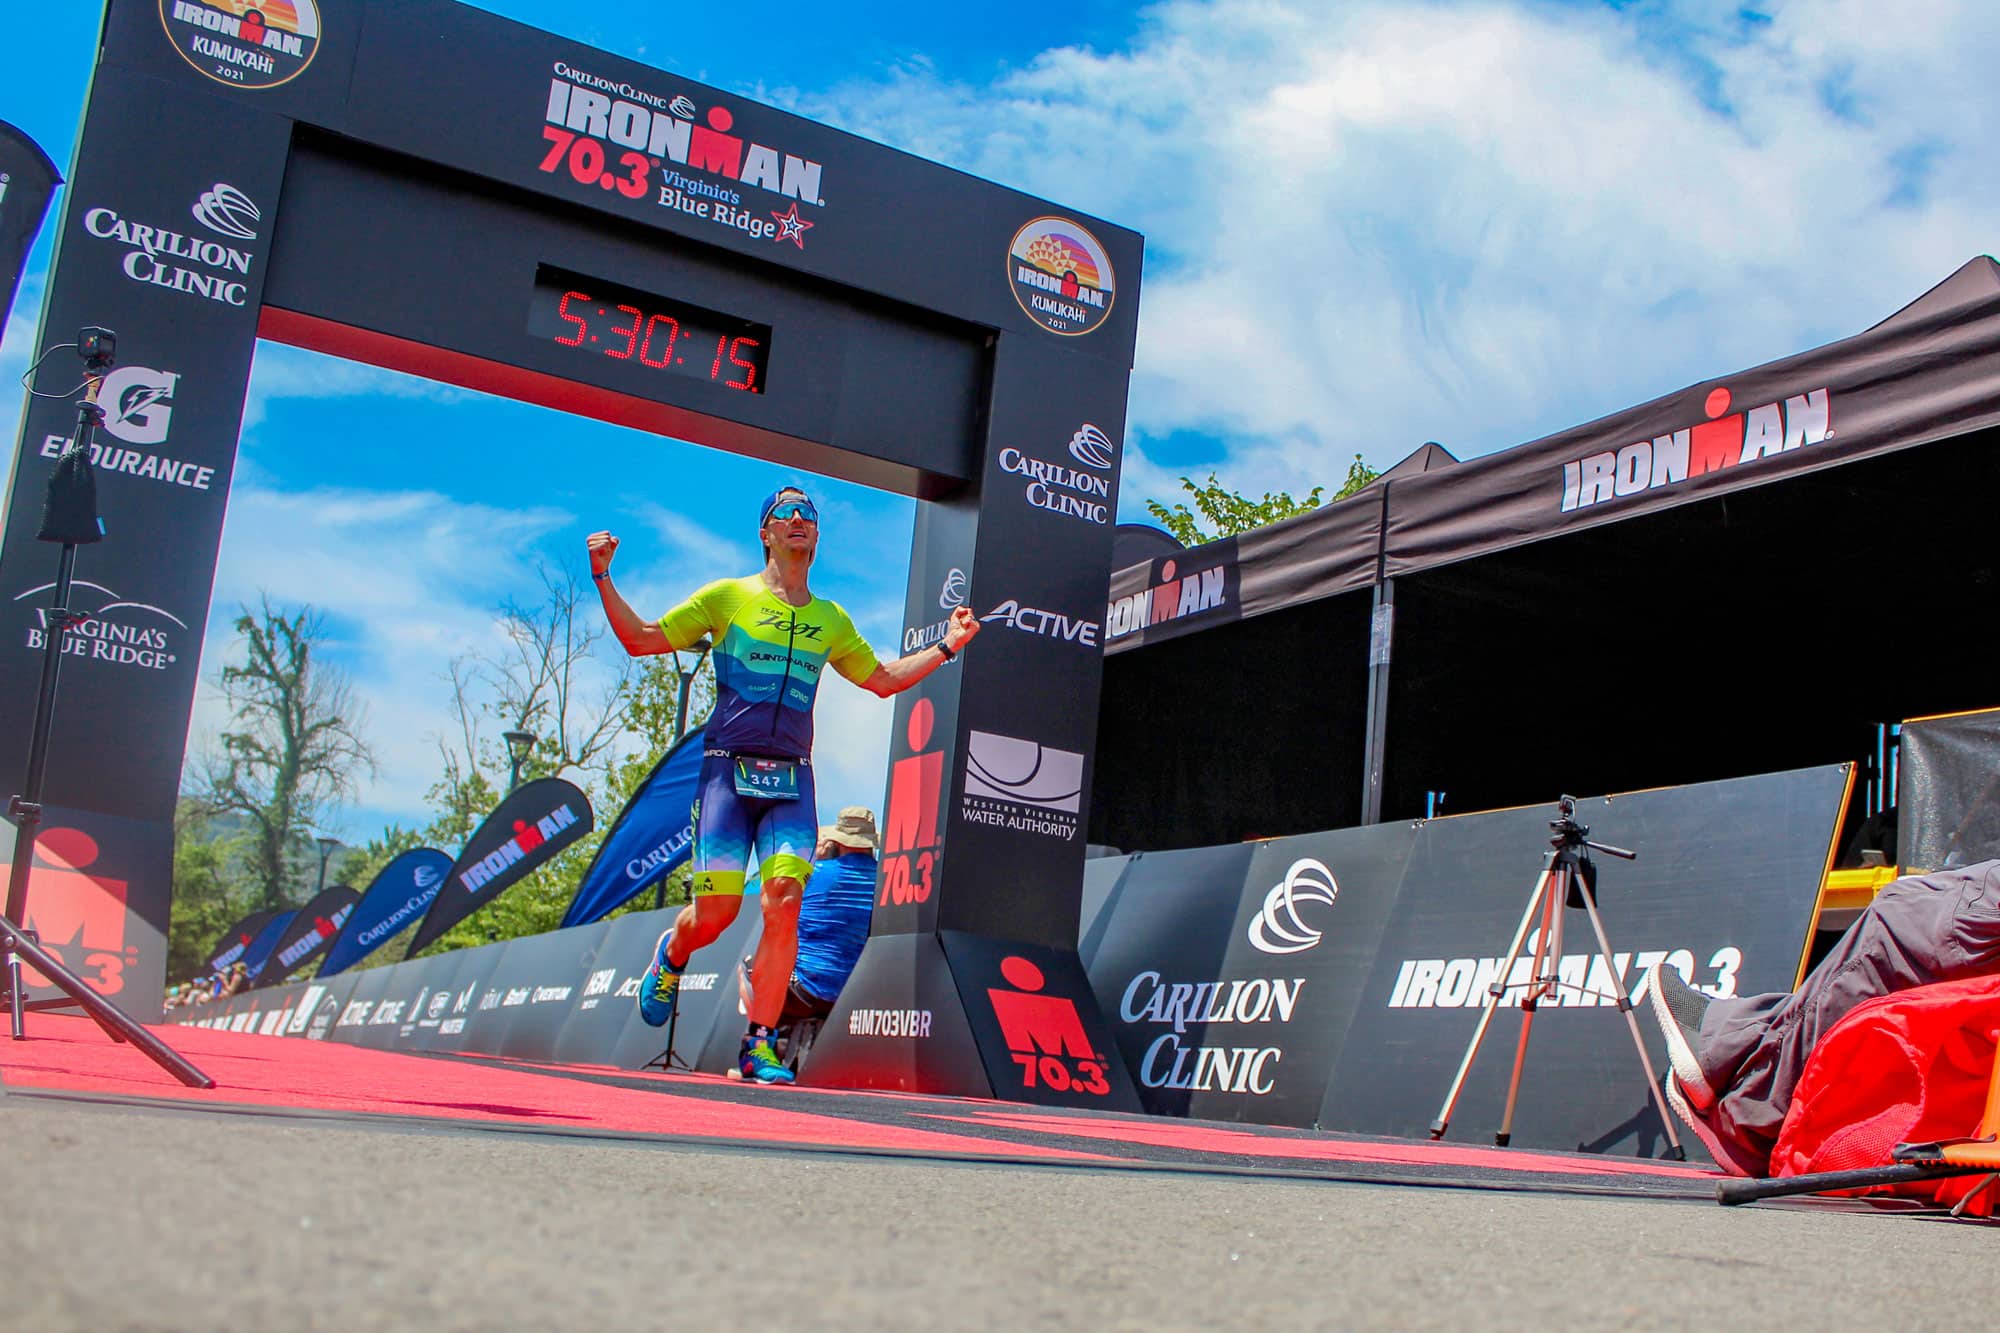 Marathon runner crosses the finish line with his arms up as he passes under the Ironman arch with a clock timing the race on display.